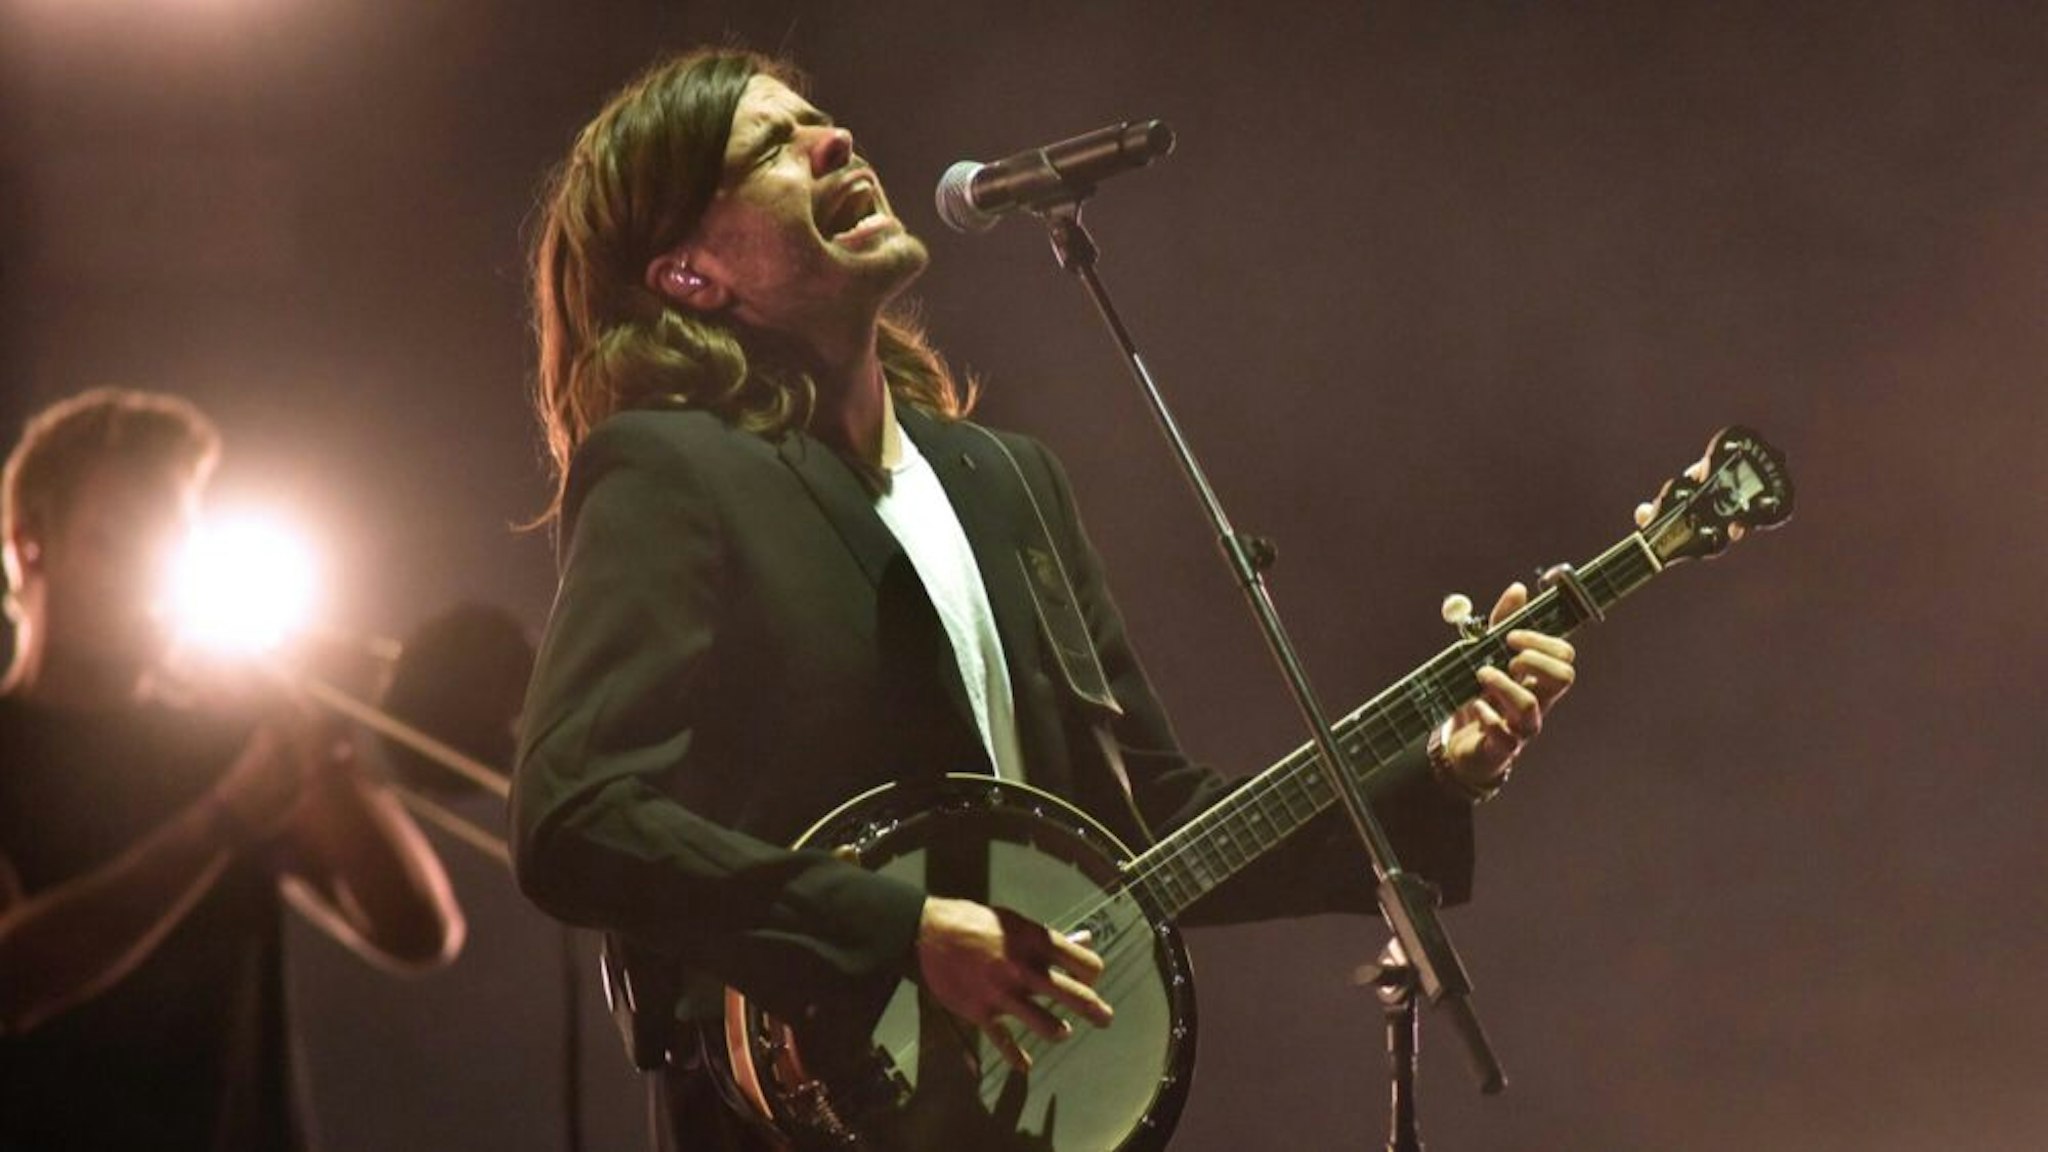 Winston Marshall of Mumford & Sons performs during the Okeechobee Music Festival at Sunshine Grove on March 08, 2020 in Okeechobee, Florida.